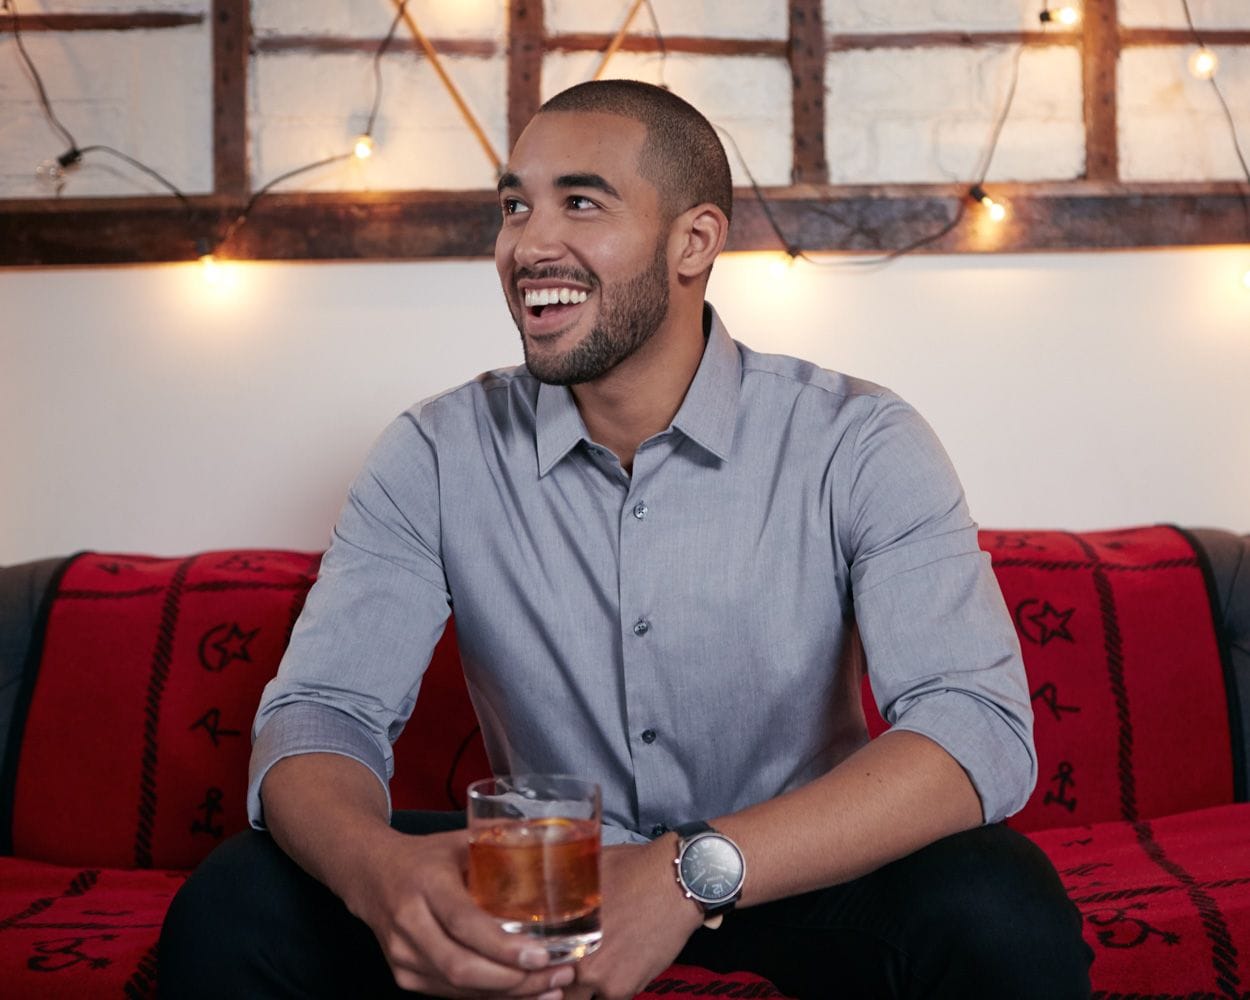 Wedding Cocktails: An Interview with the Apartment Bartender